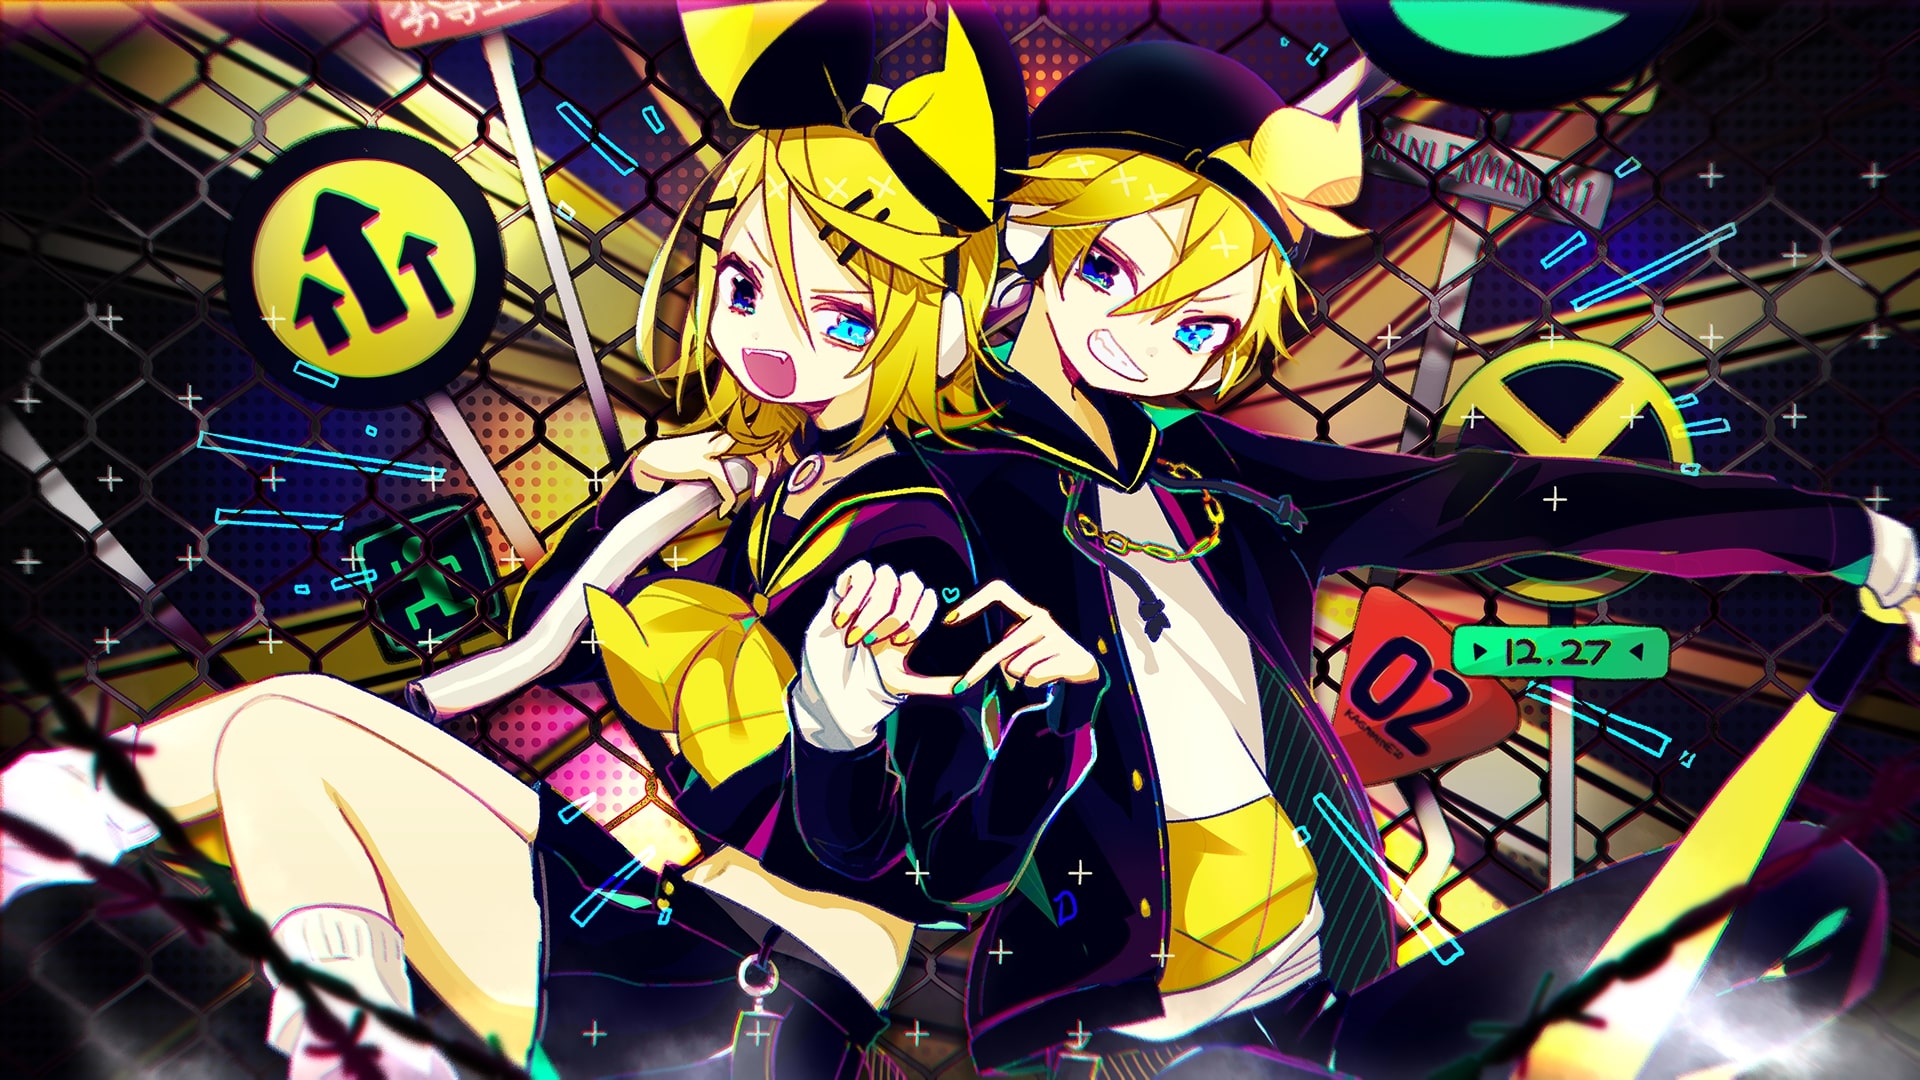 Free Download Wallpaper Of Anime Vocaloid Len Kagamine Rin Kagamine 19x1080 For Your Desktop Mobile Tablet Explore 50 Kagamine Background Kagamine Background Kagamine Len Wallpaper Rin Kagamine Wallpaper